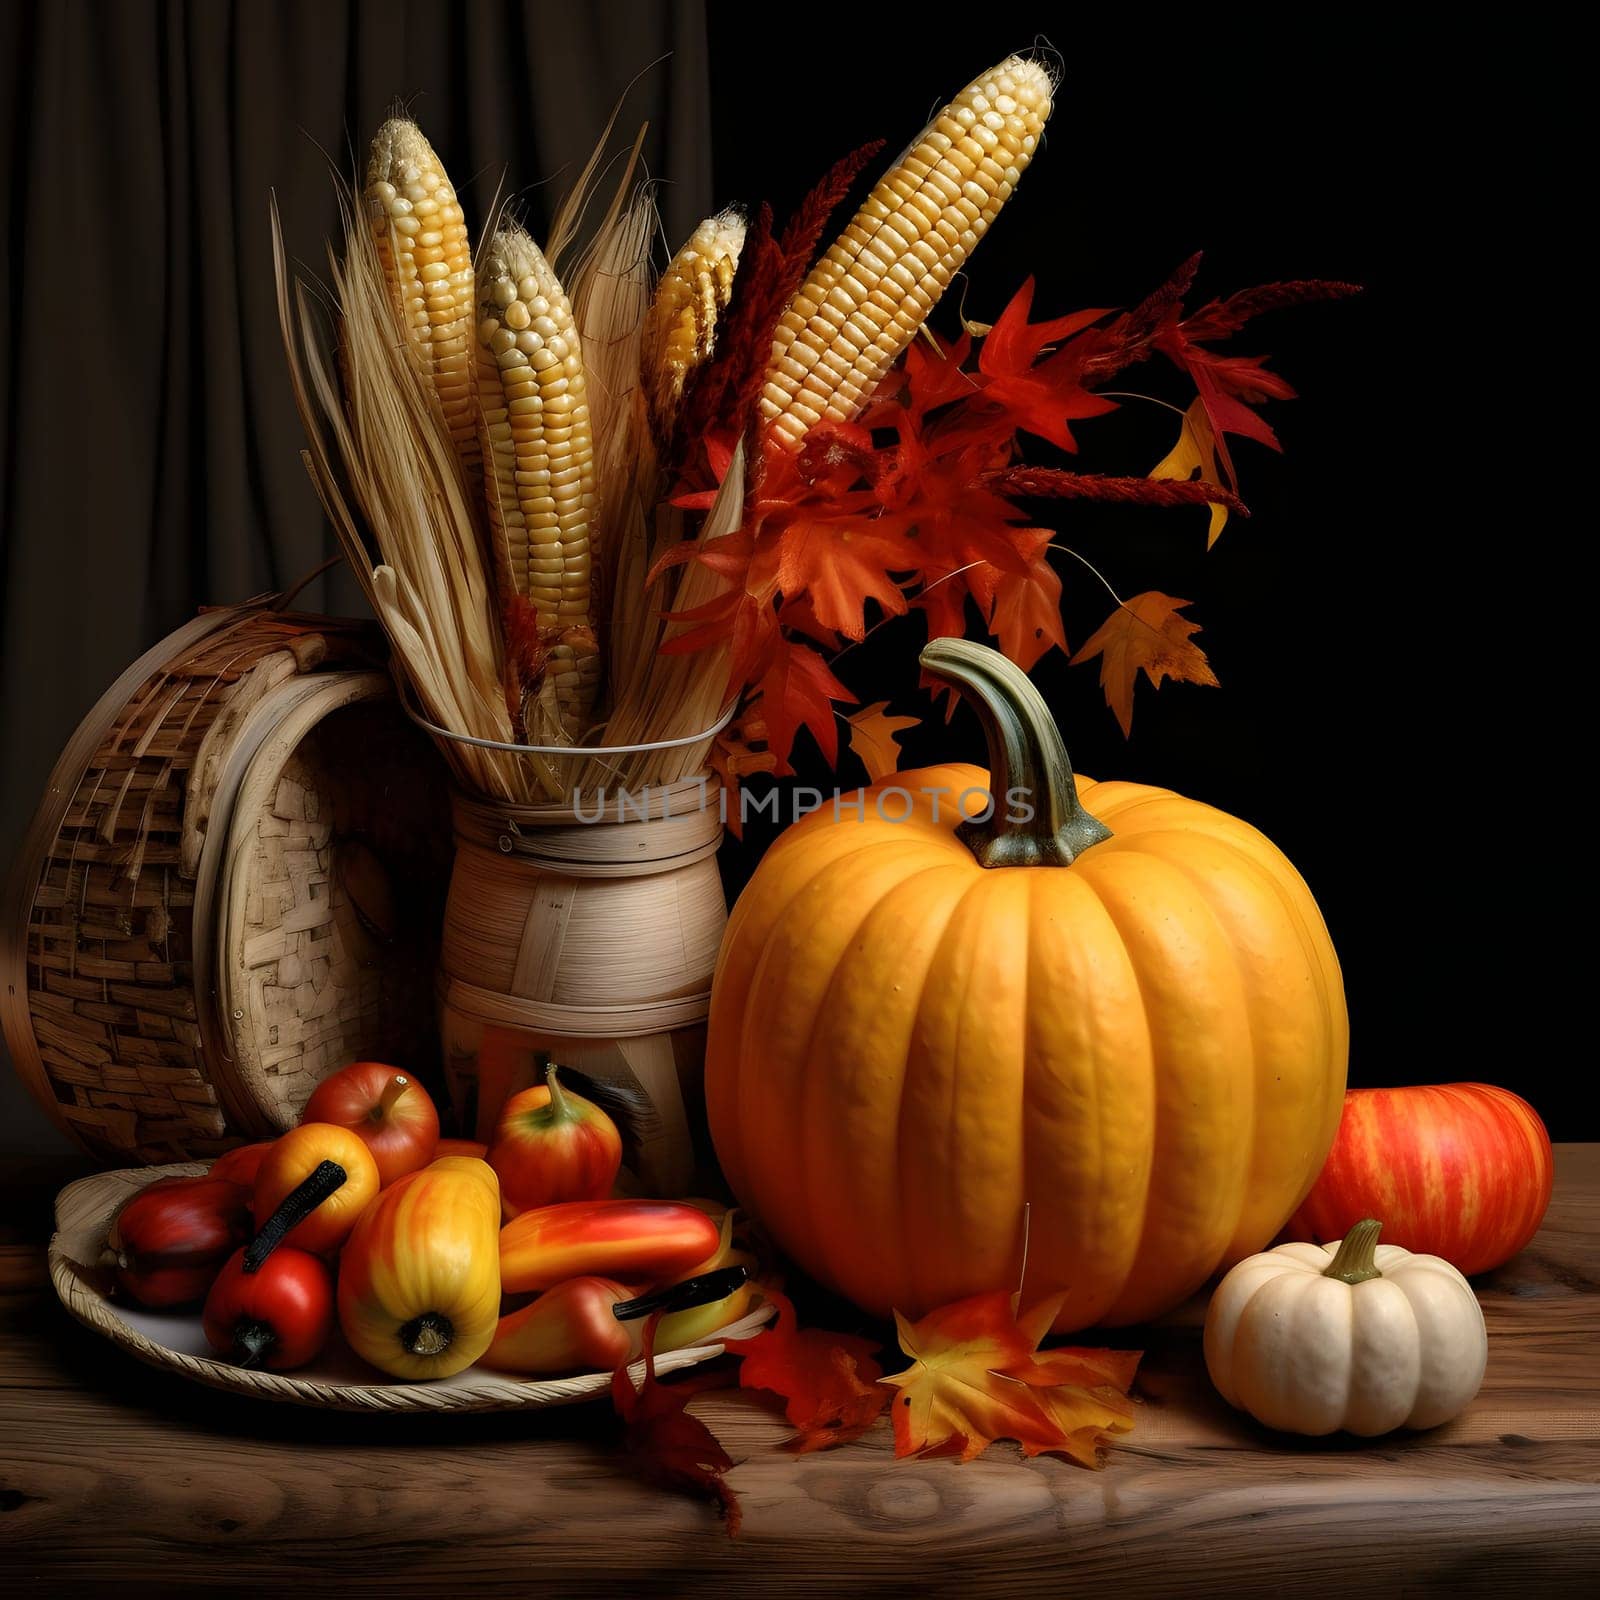 Elegantly arranged crops from the field, pumpkins and corn on a dark wooden background. Pumpkin as a dish of thanksgiving for the harvest. by ThemesS